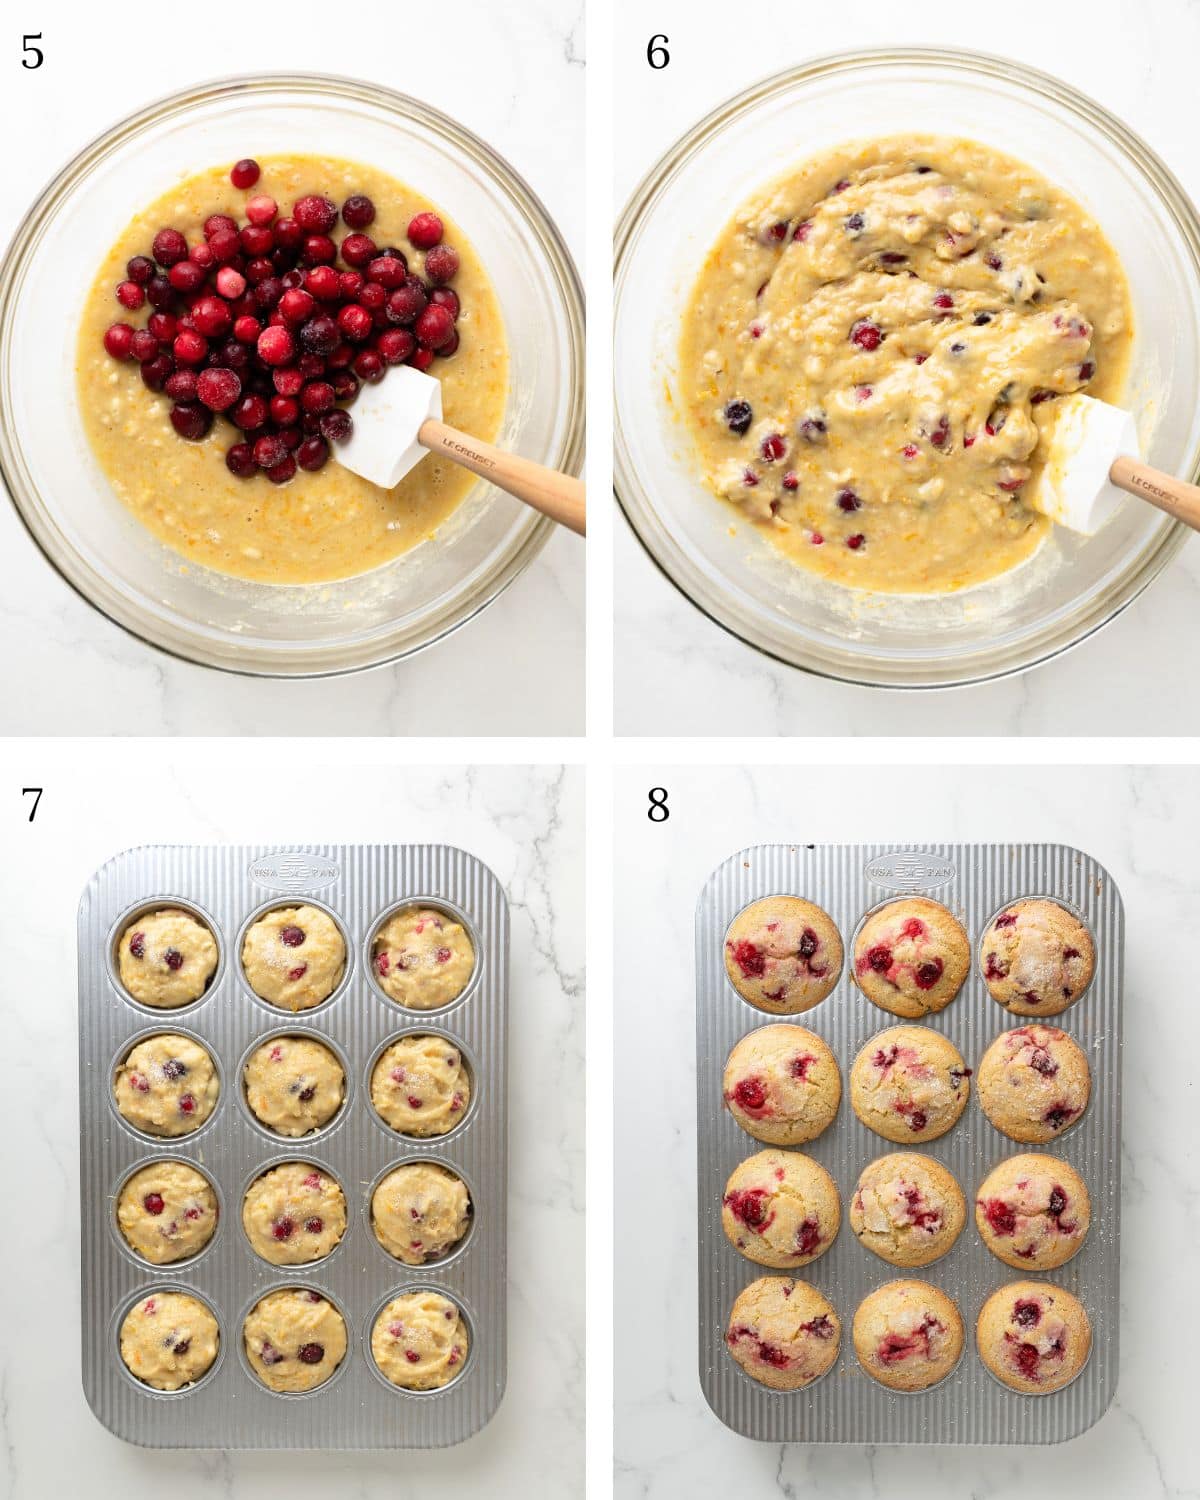 Steps showing gluten-free cranberry orange muffins. A large bowl with frozen cranberries being folded in. A large clear bowl with the batter fully mixed. A muffin tin with the batter is added to each well. Finally, the last photo shows 12 fully baked muffins in the tin, doming over the top with vibrant red cranberries poking through.